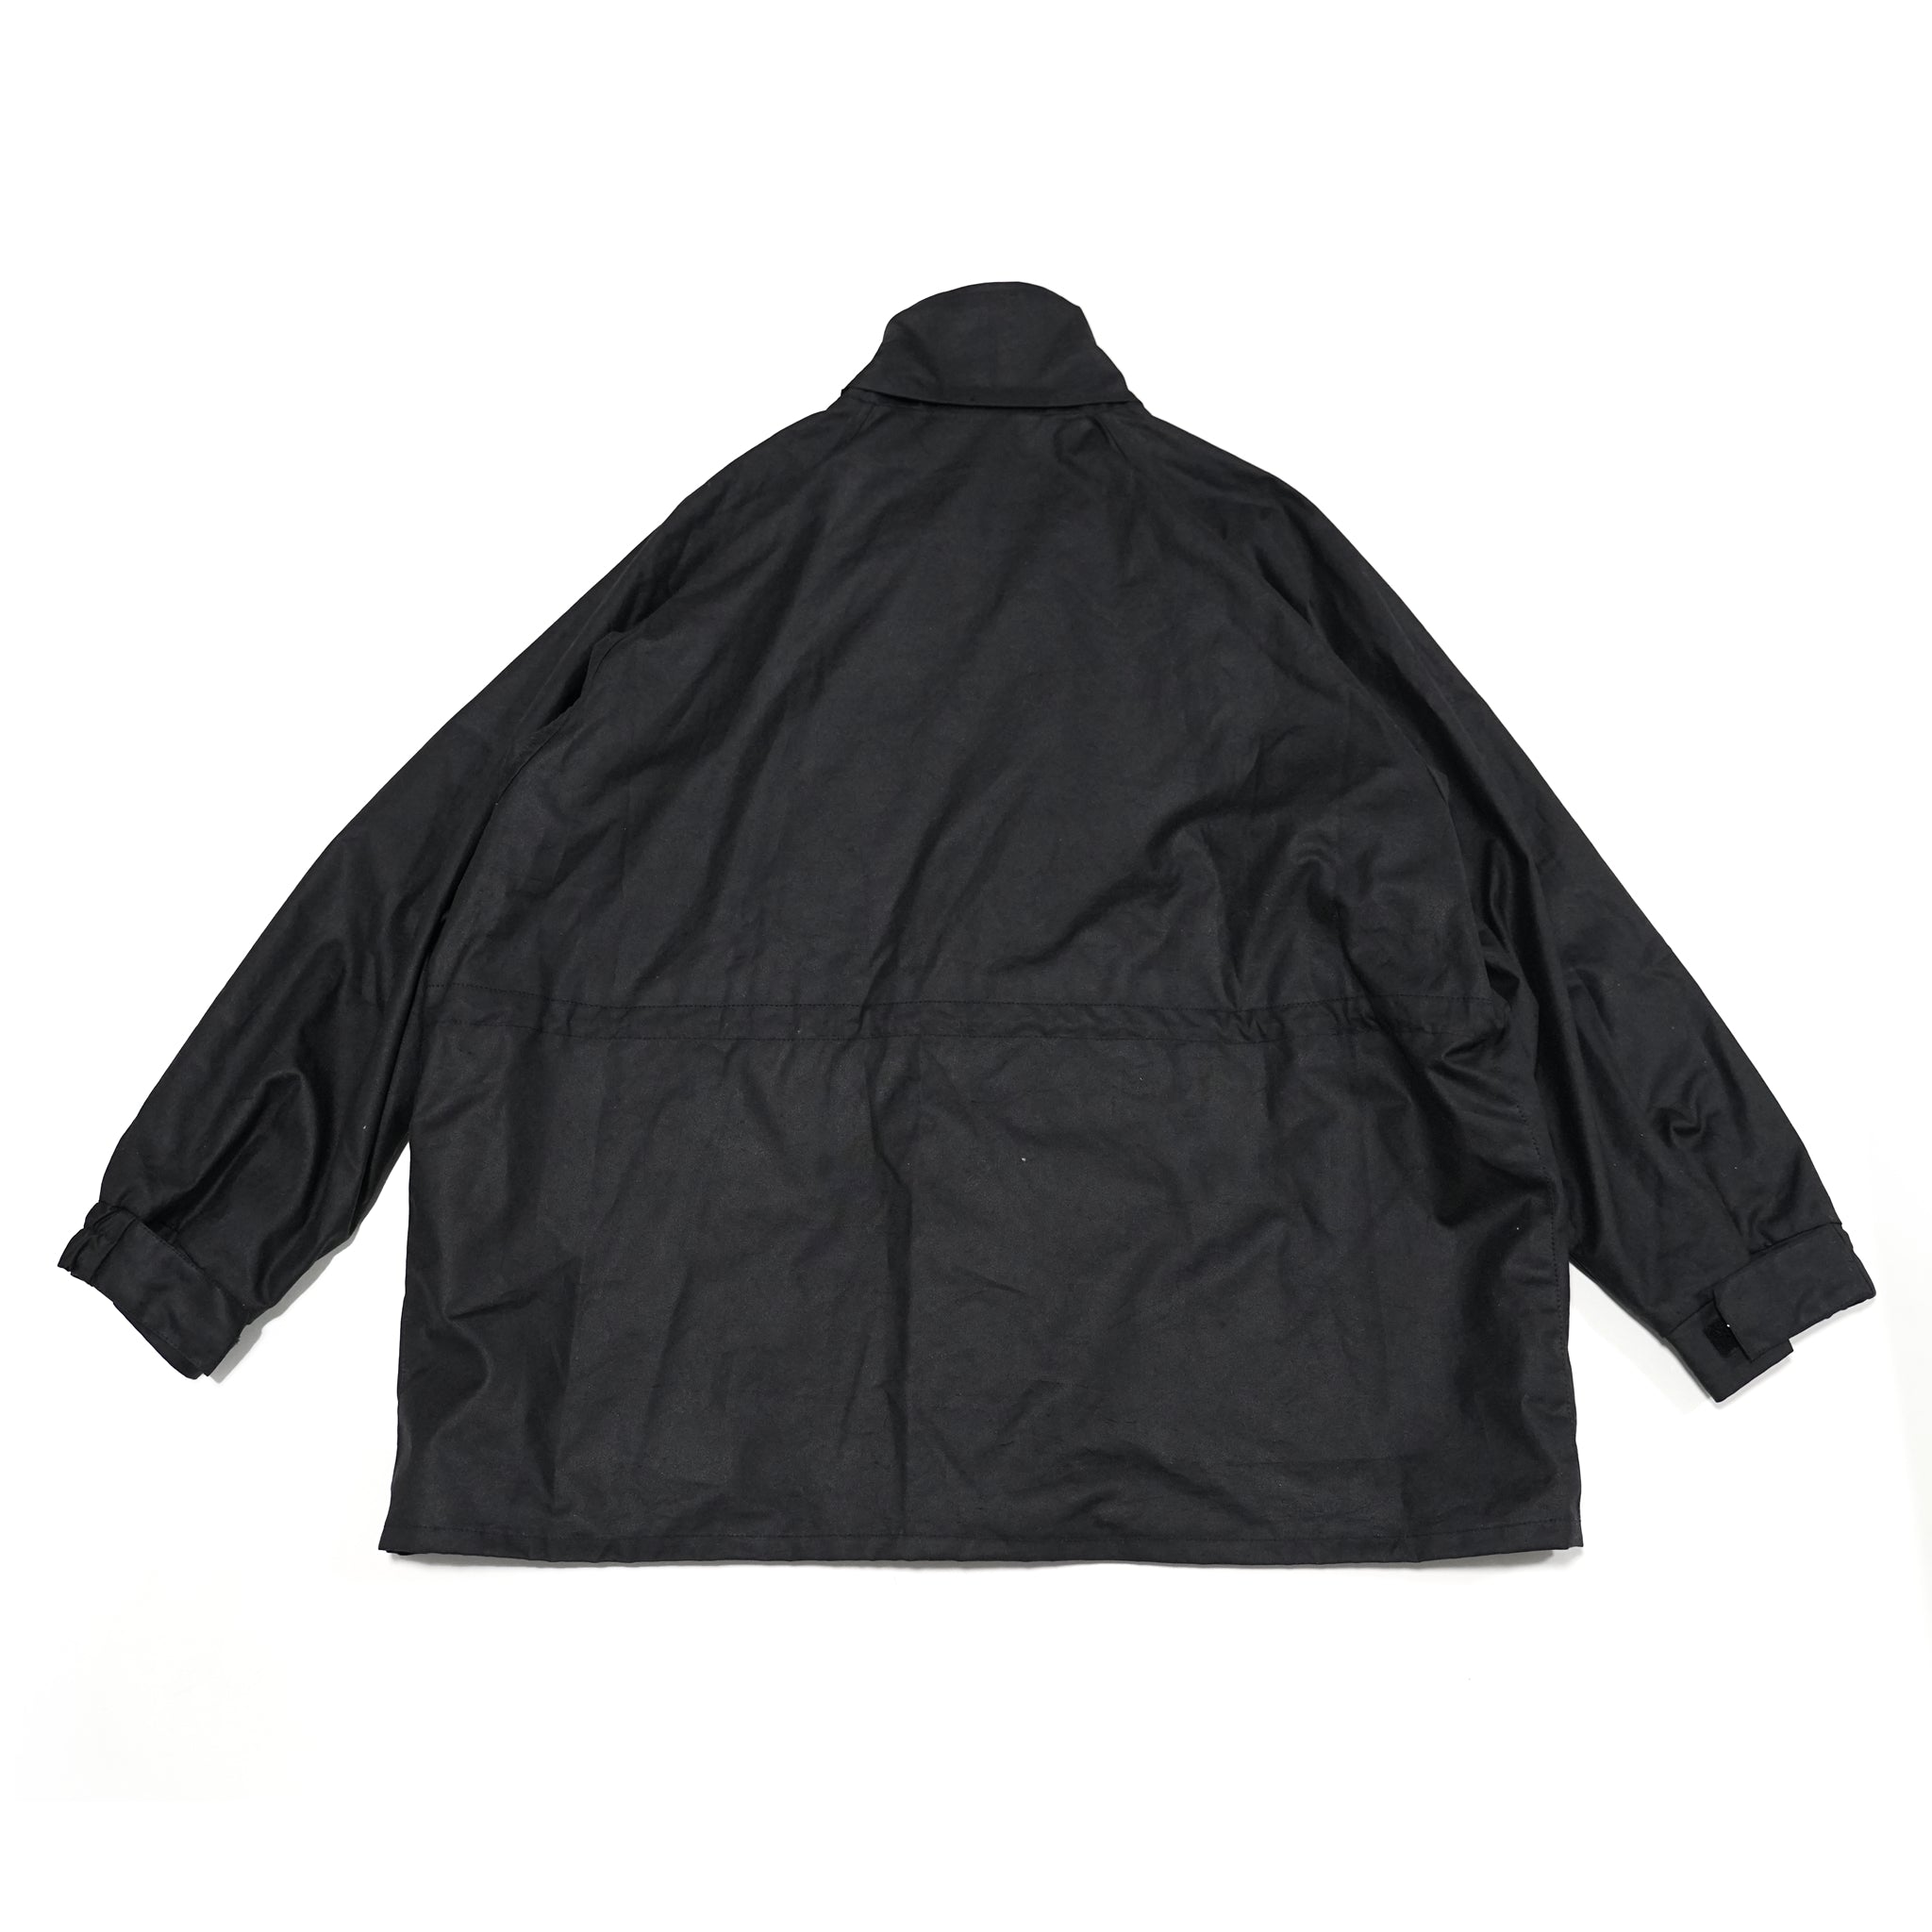 No:HFW22 FW02 | Name:Foul Jacket | Color:Black/Steal【H.F AND WEAVER_エイチ.エフ アンド ウィーバー】